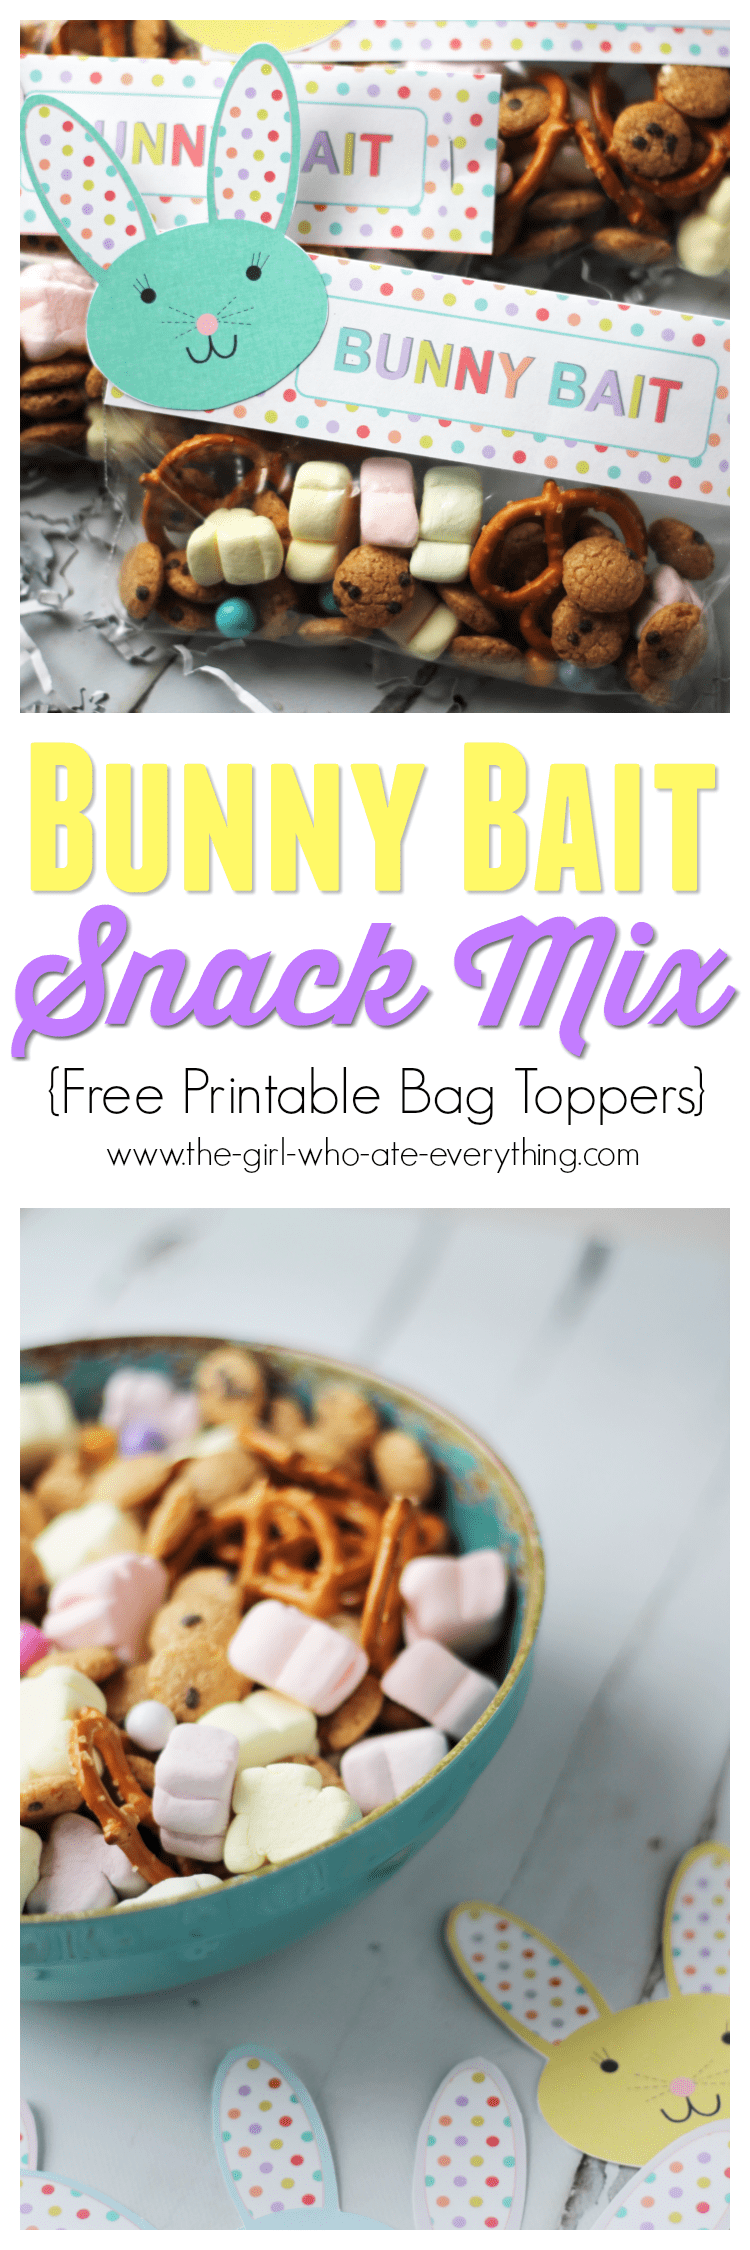 Bunny Bait Snack Mix with Free Printable Bag Toppers